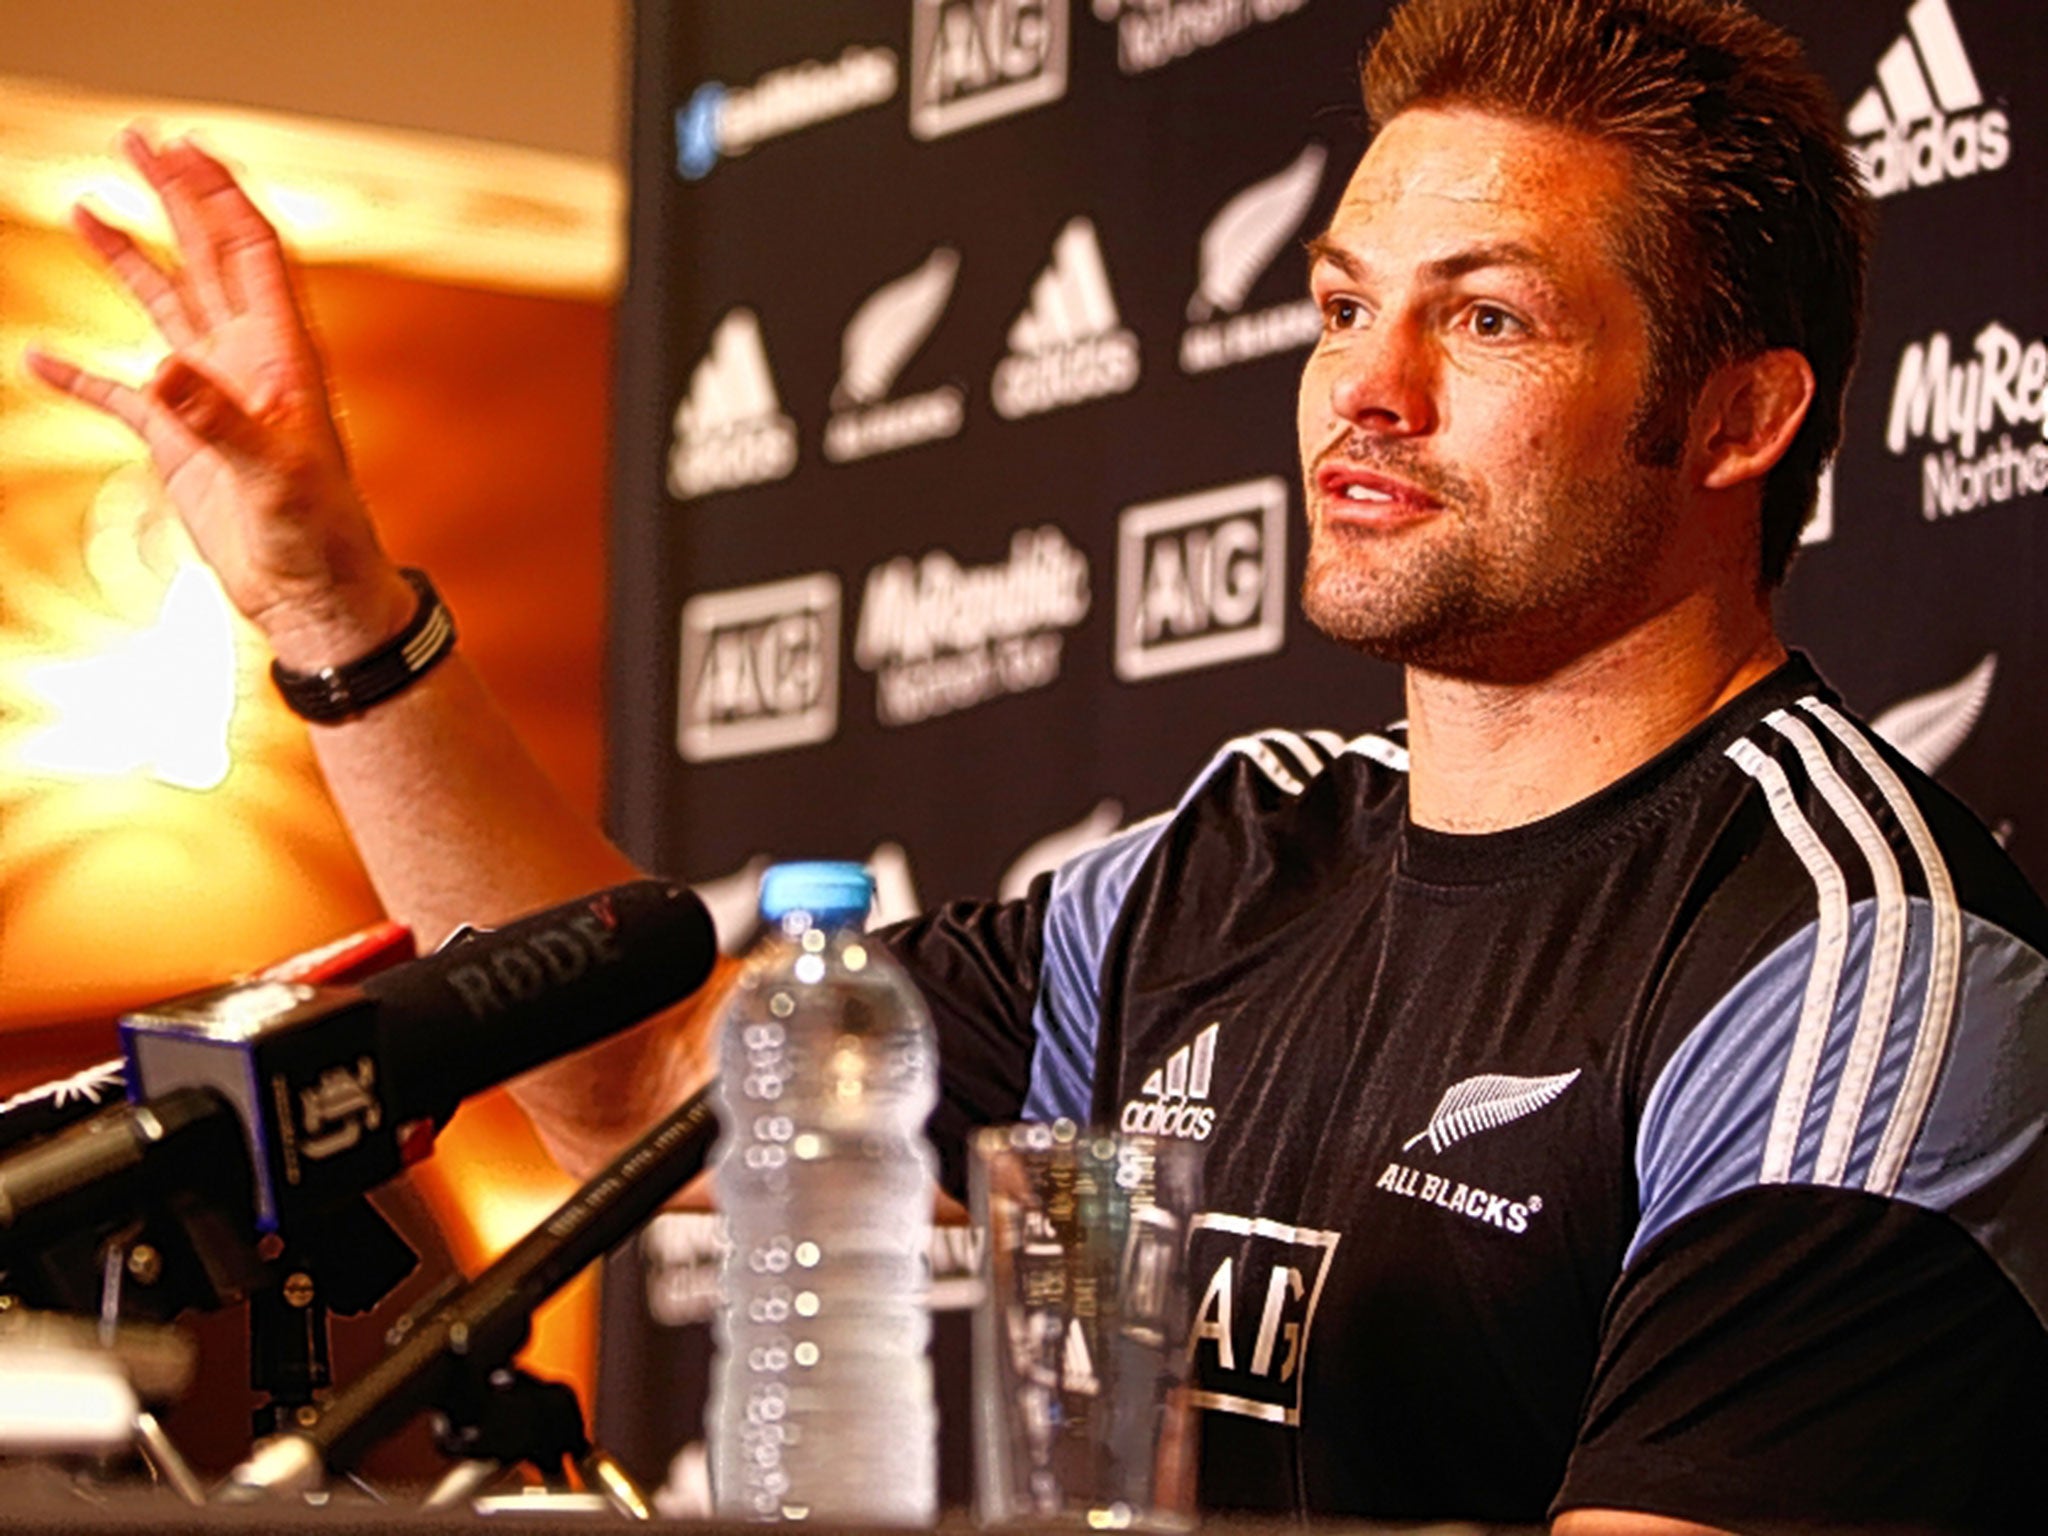 Richie McCaw insists the All Blacks don’t listen to praise